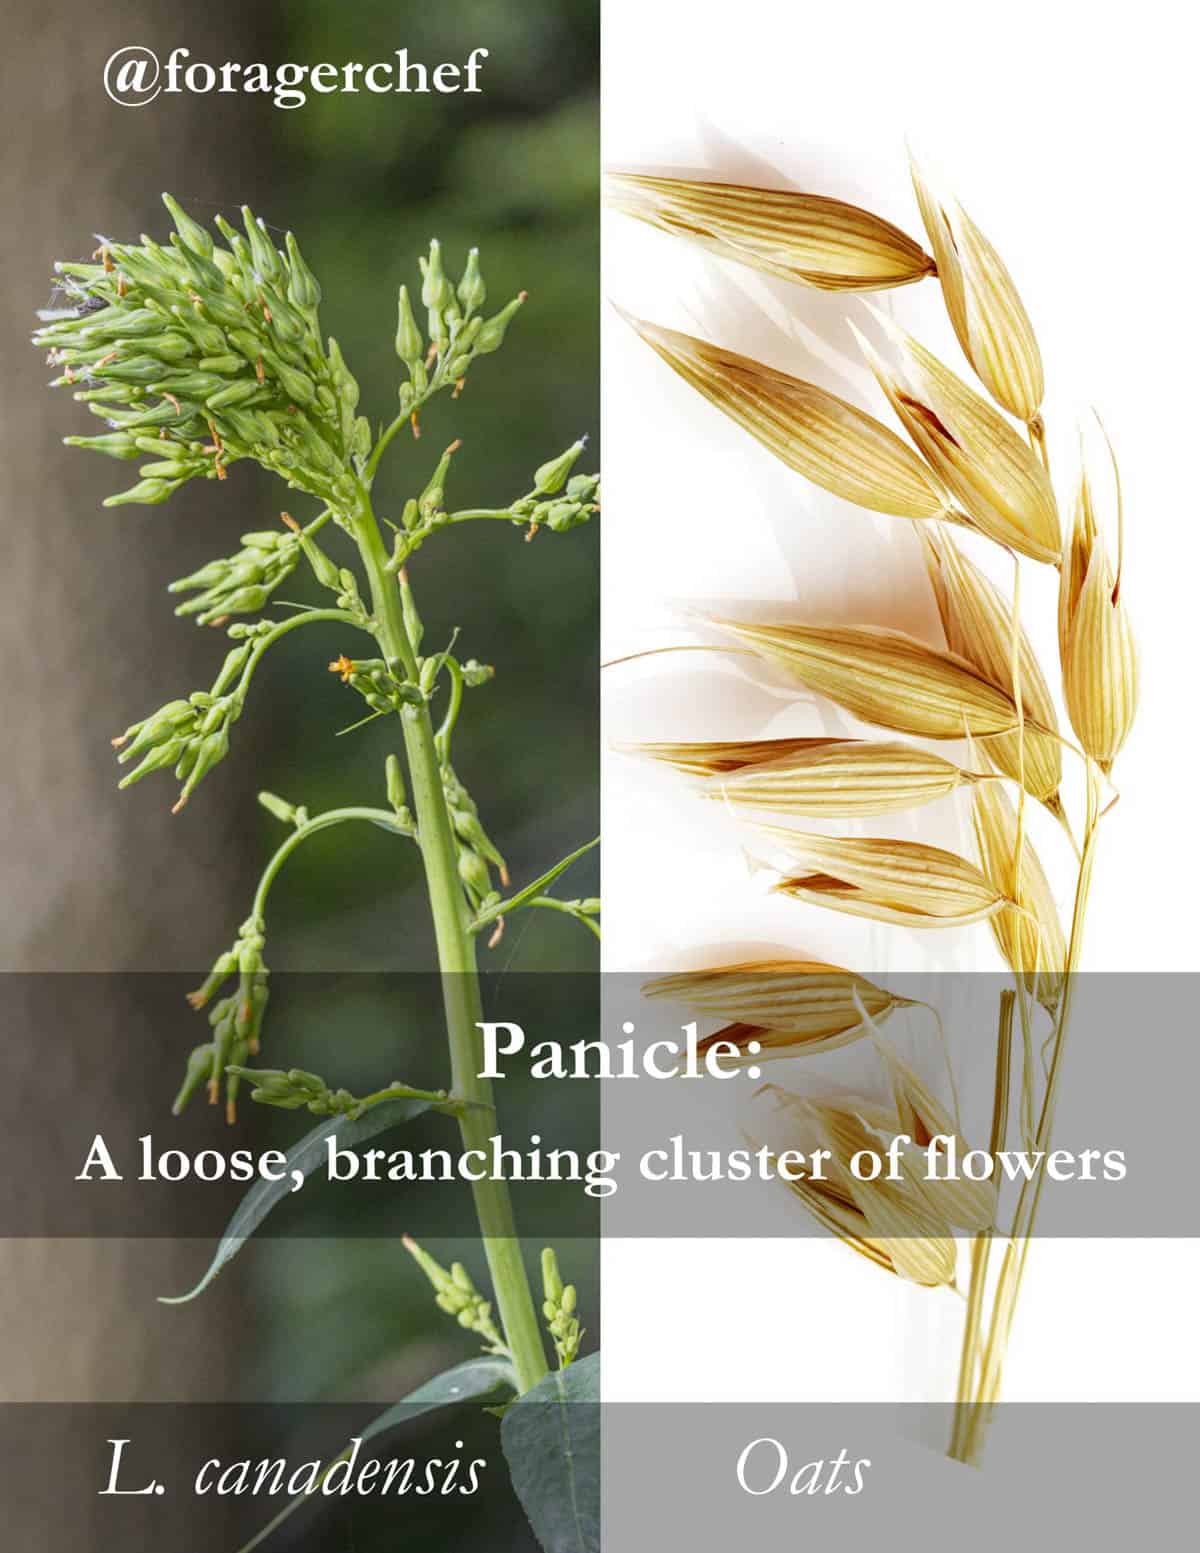 An infographic describing what a panicle of flowers is for identification, comparing the panicle of Canadian lettuce with common oats. 